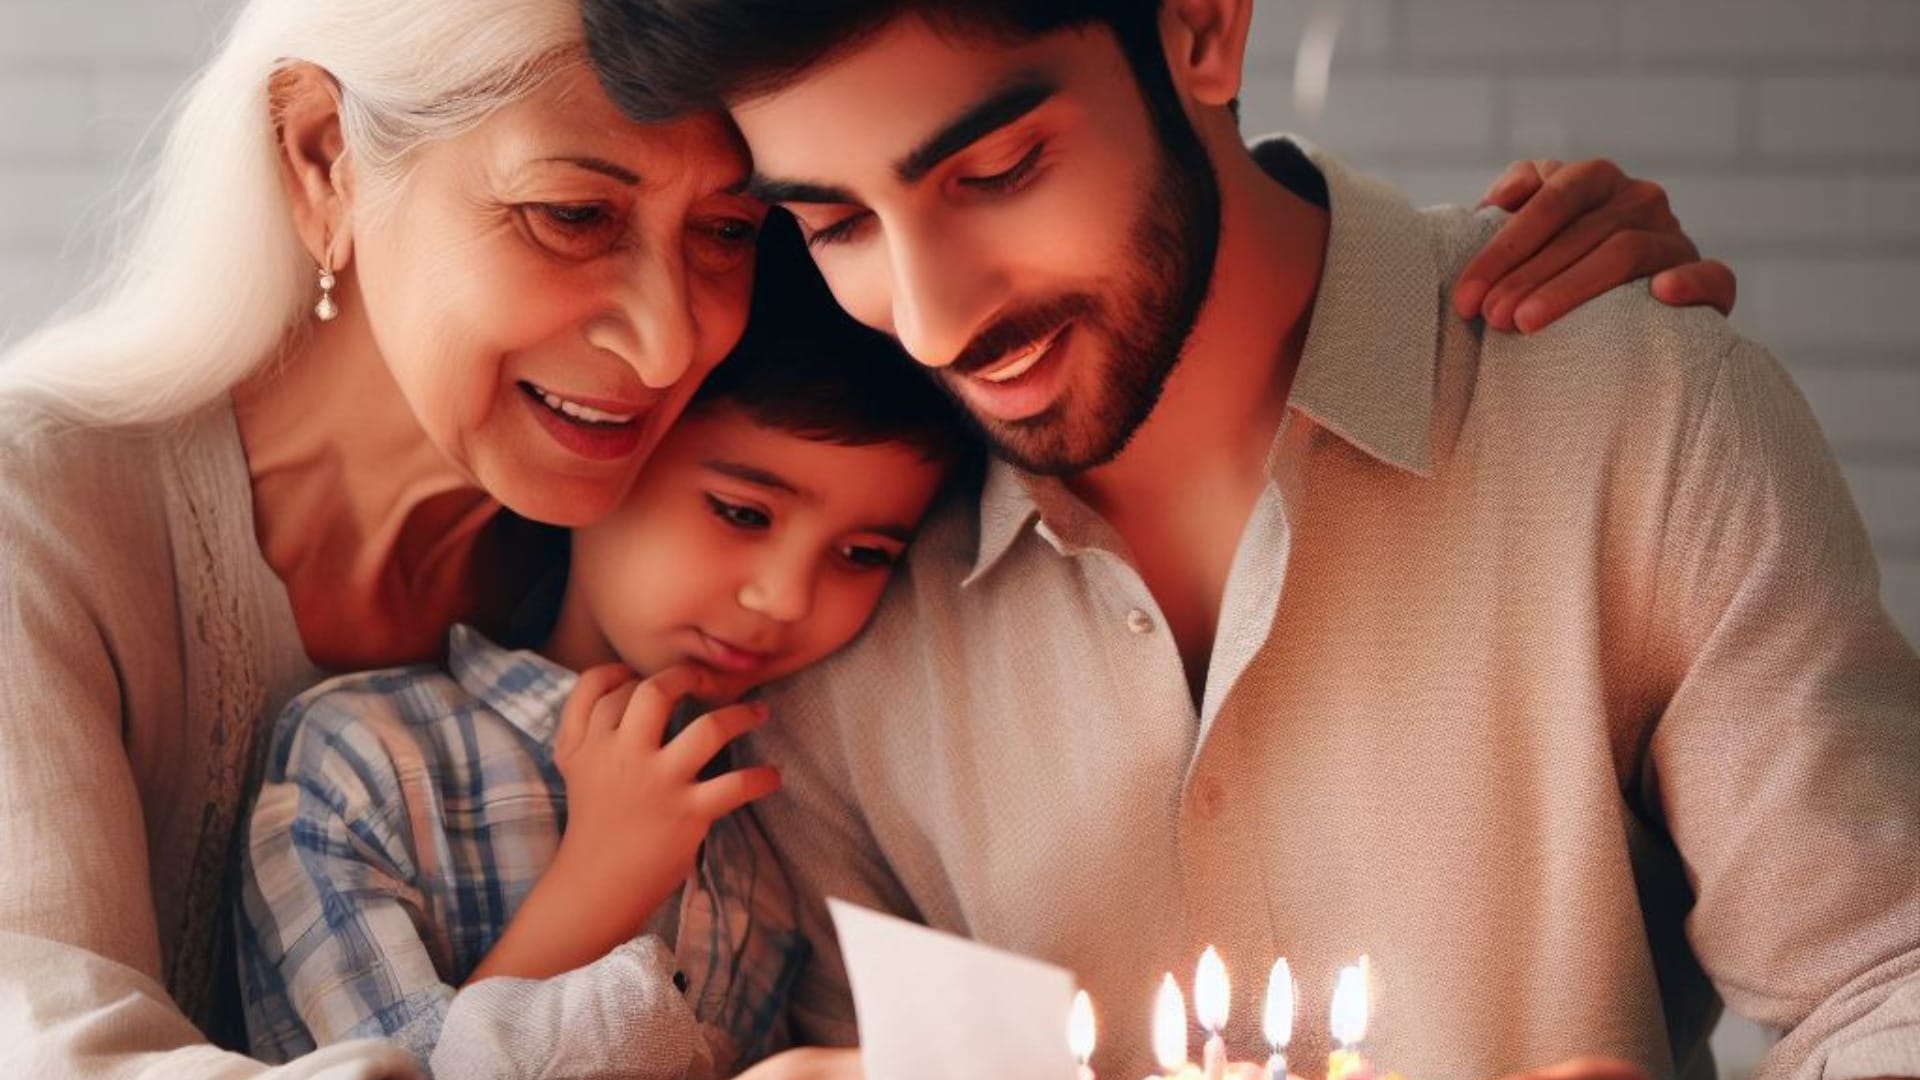 A touching birthday celebration captured in a photo, featuring a parent and their son sharing a heartfelt moment as they read or exchange warm birthday wishes. The genuine connection and love between them are beautifully portrayed in this special image.